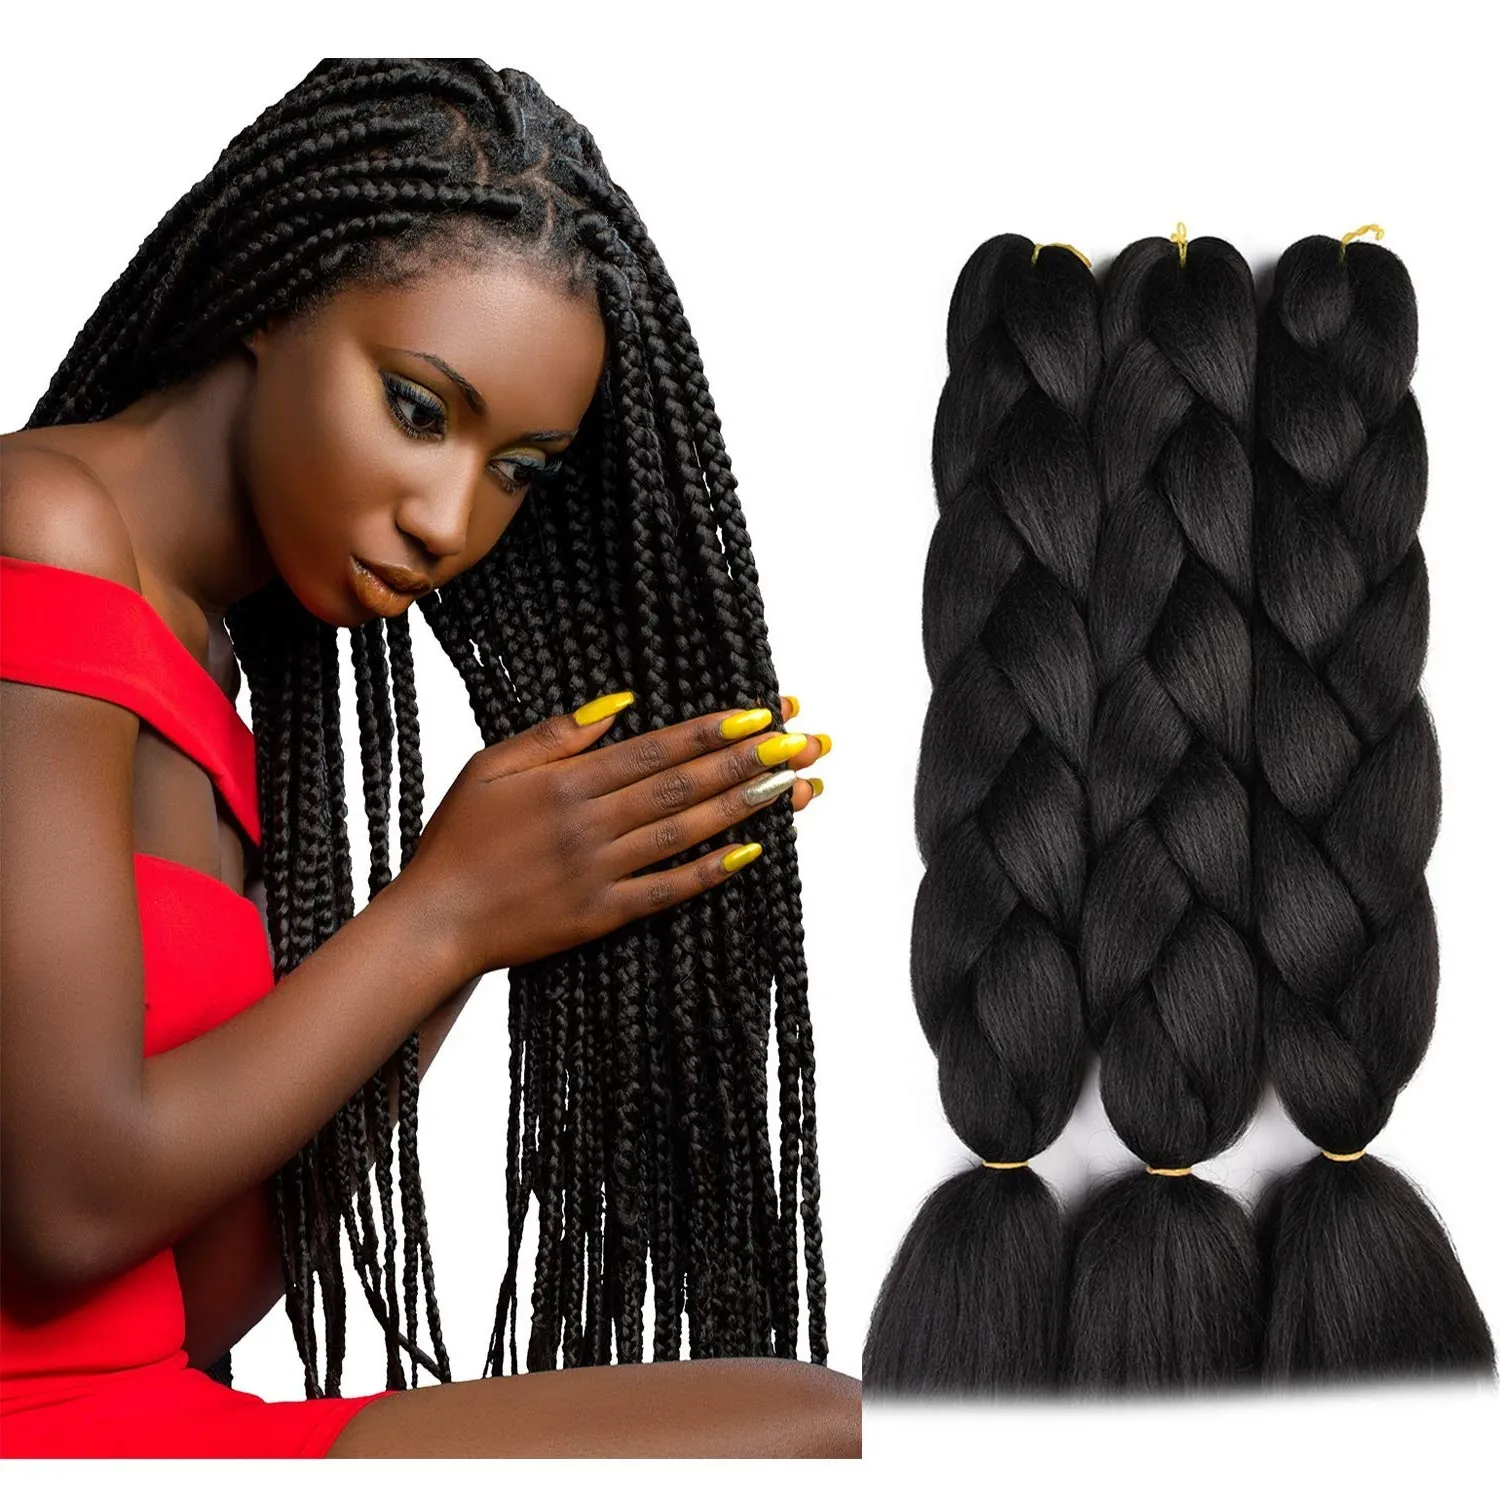 

Free Sample Hot water Setting Extensions For African Expression Ombre Pre Stretched Braids Jumbo Braid Synthetic Braiding Hair